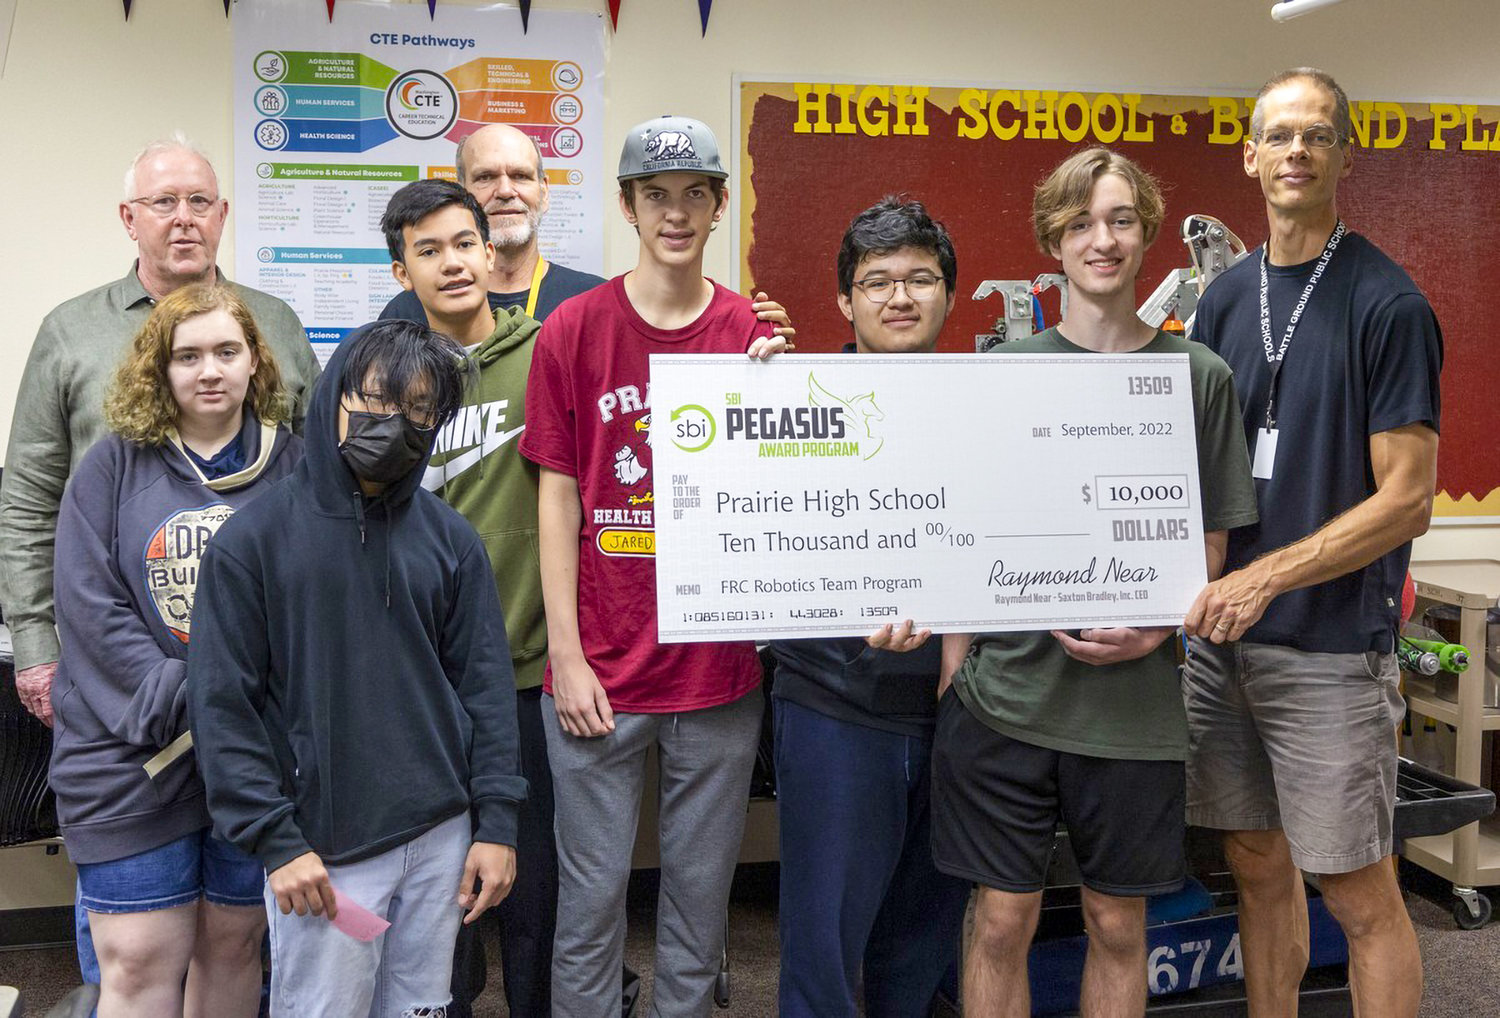 Members of the CloverBots robotics club at Prairie High School stand with a check for a $10,000 grant the program received.